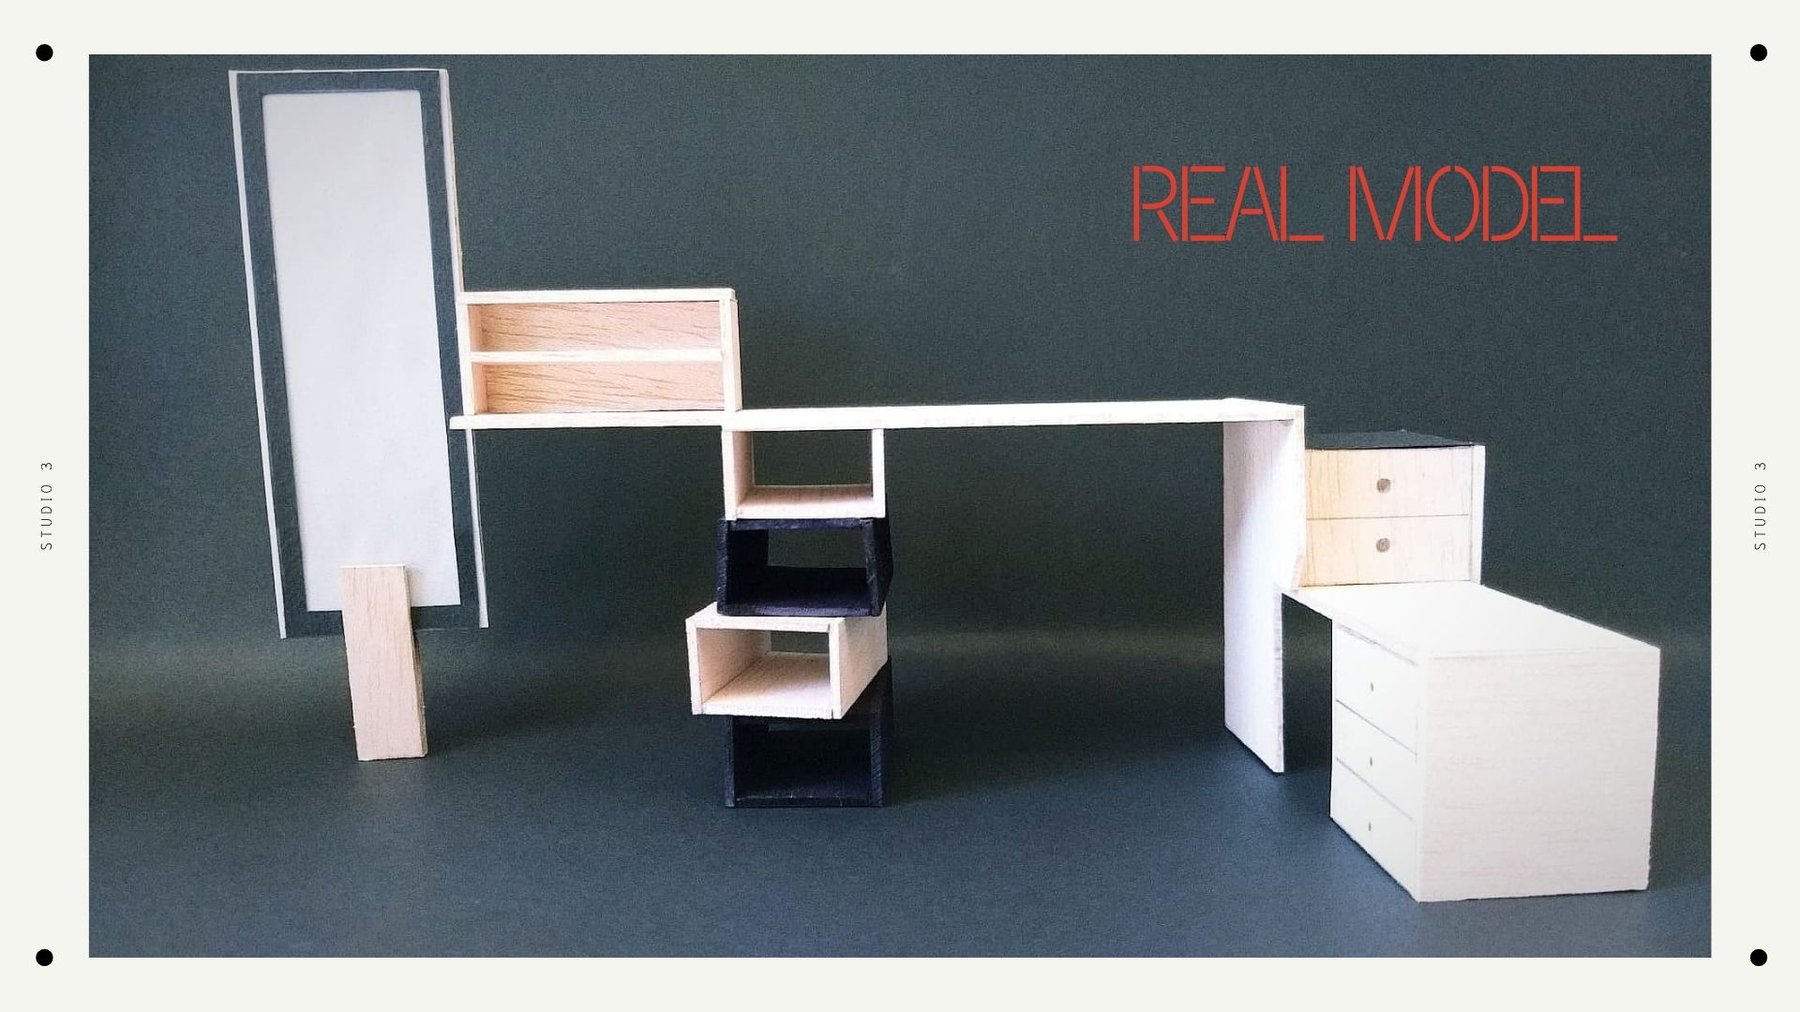 A physical model of a bespoke piece of furniture.